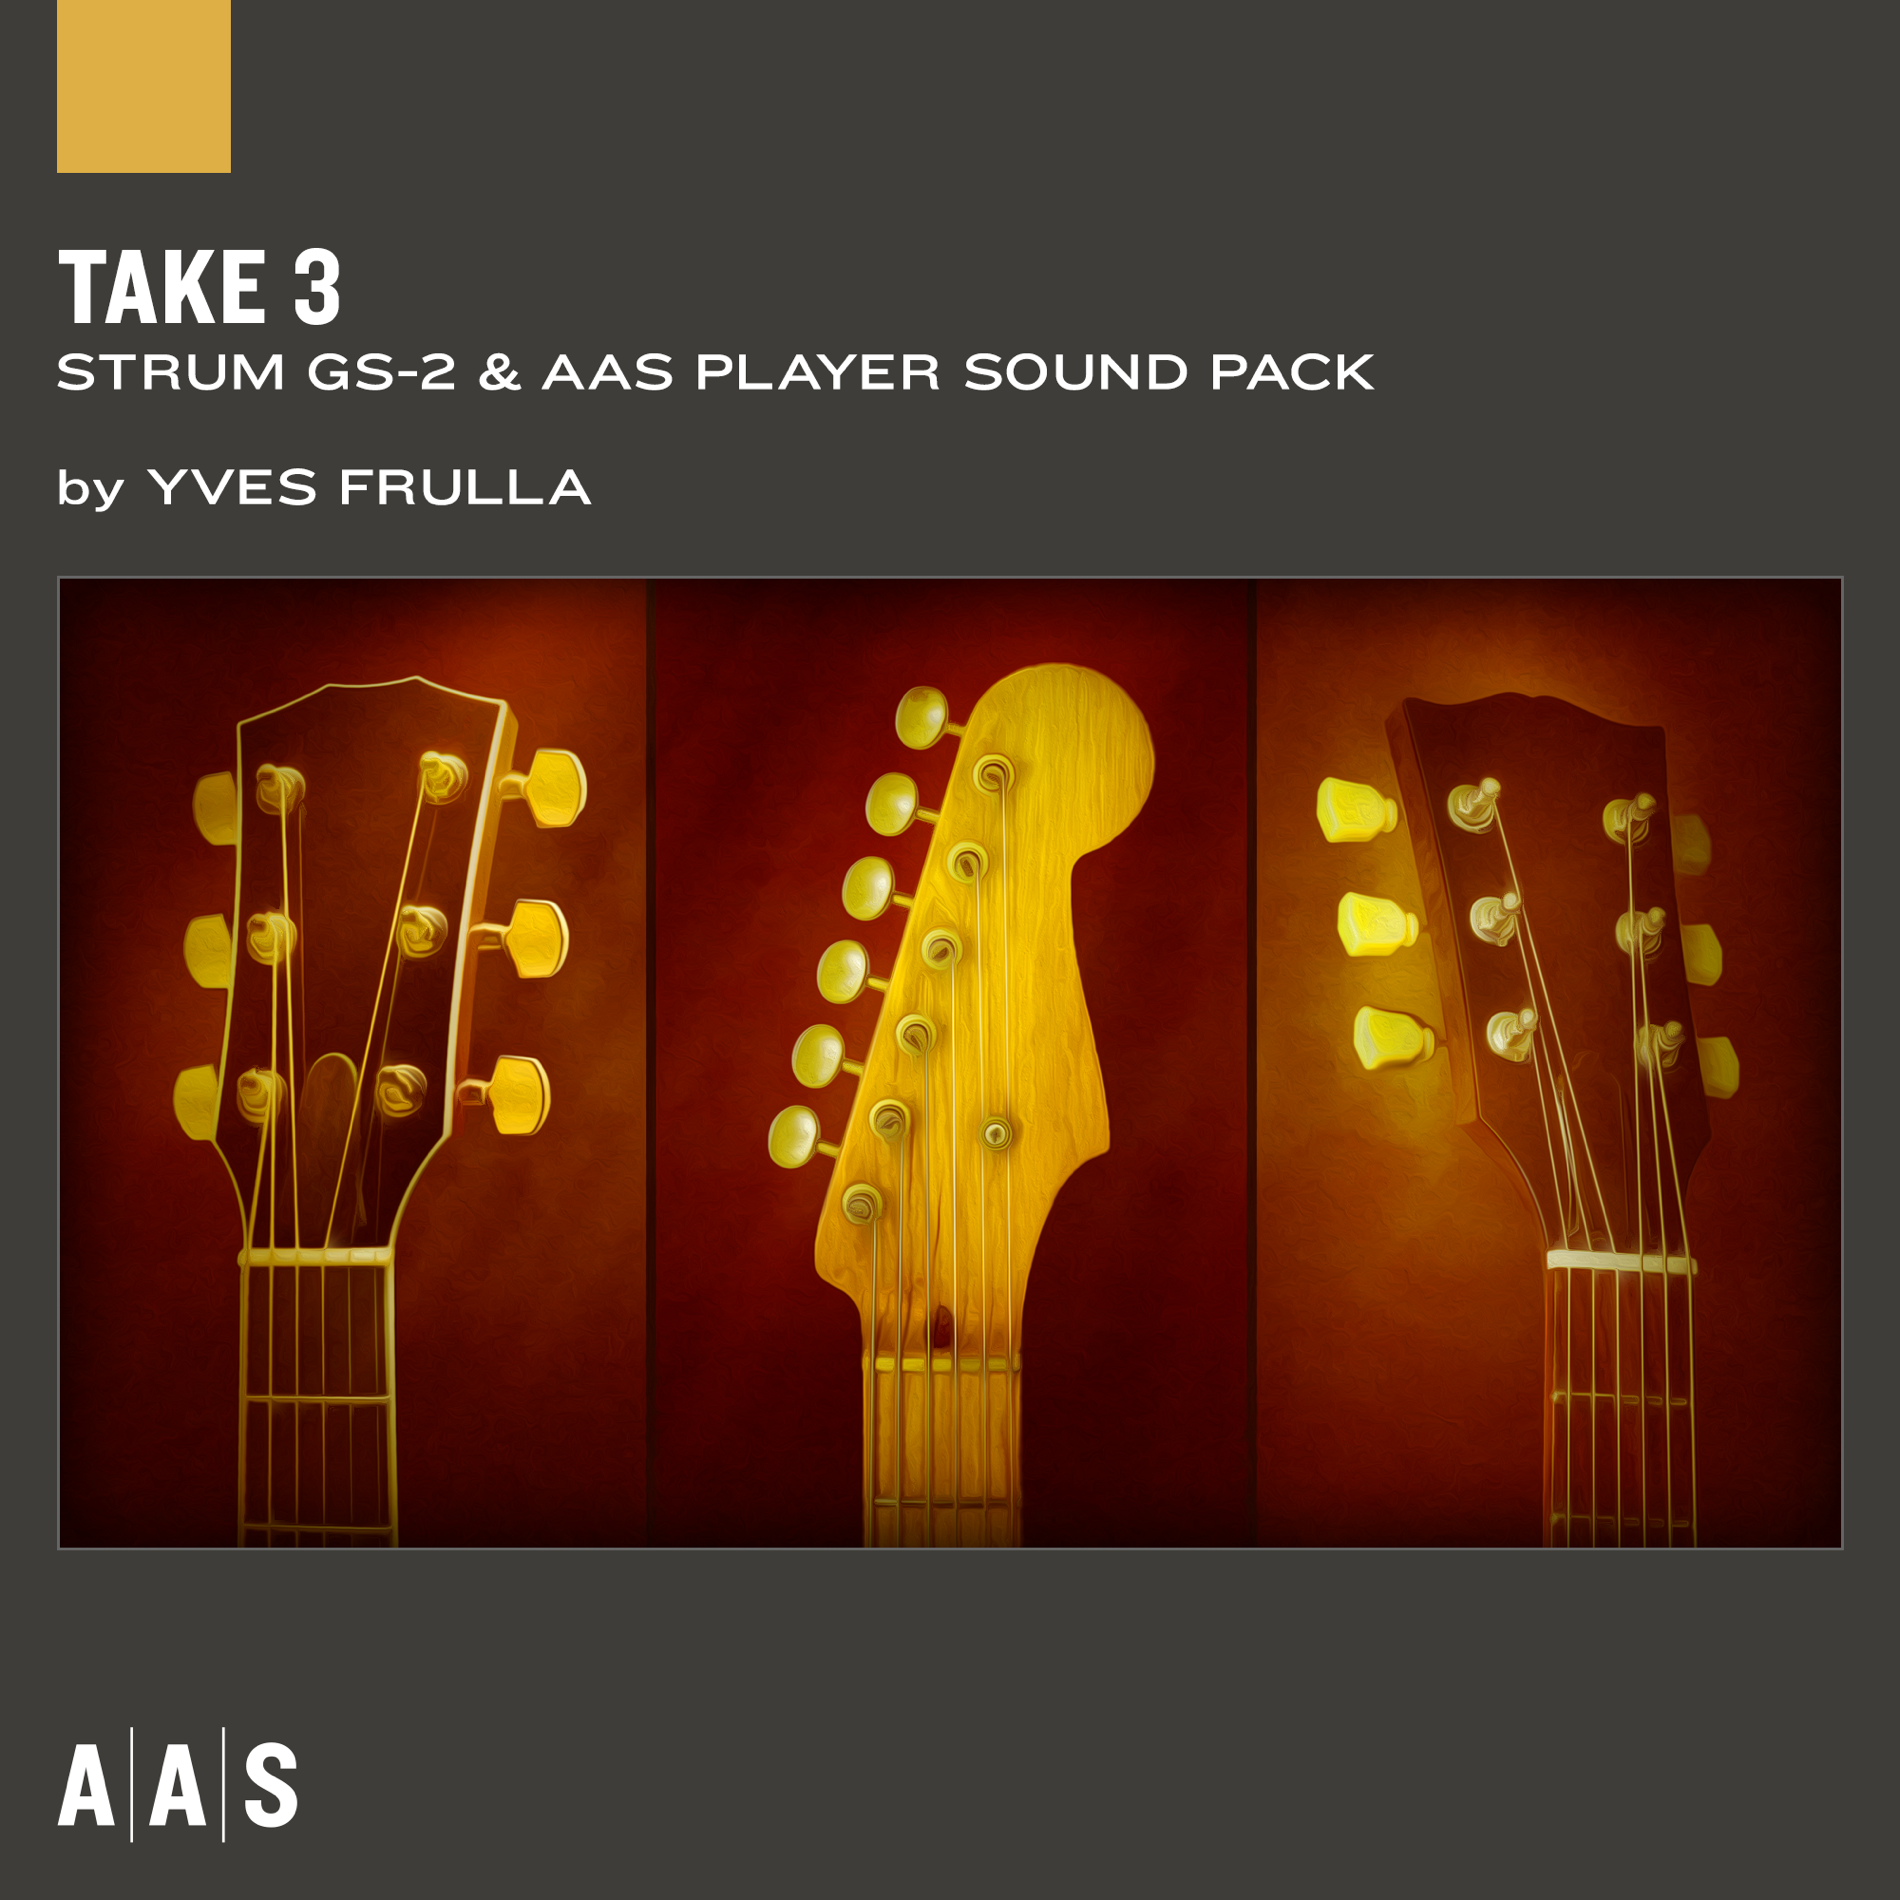 Strum and AAS Player sound pack ： Take 3